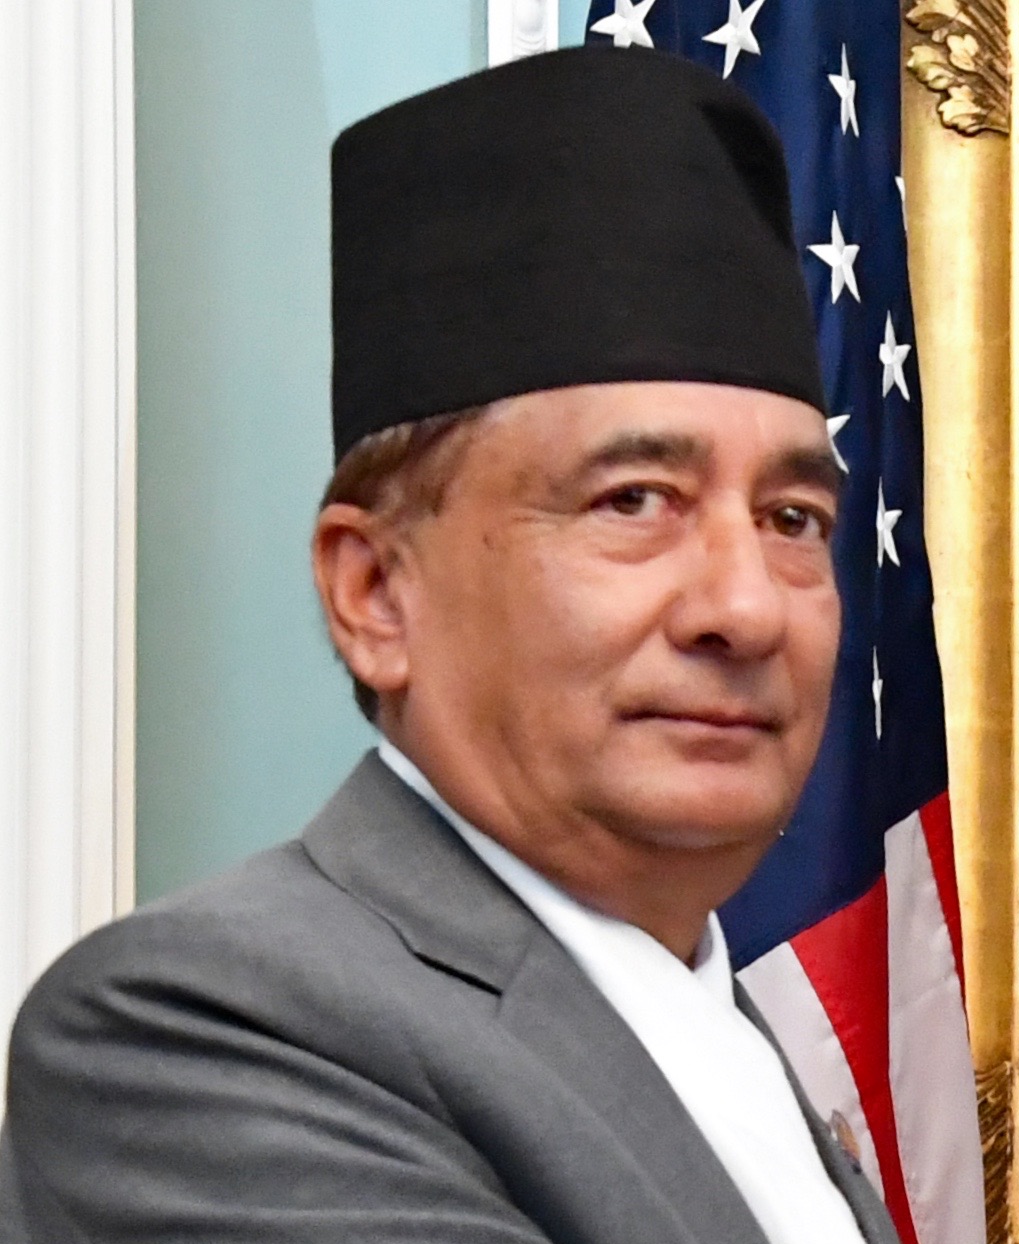 Budget holiday will end soon: Minister Karki